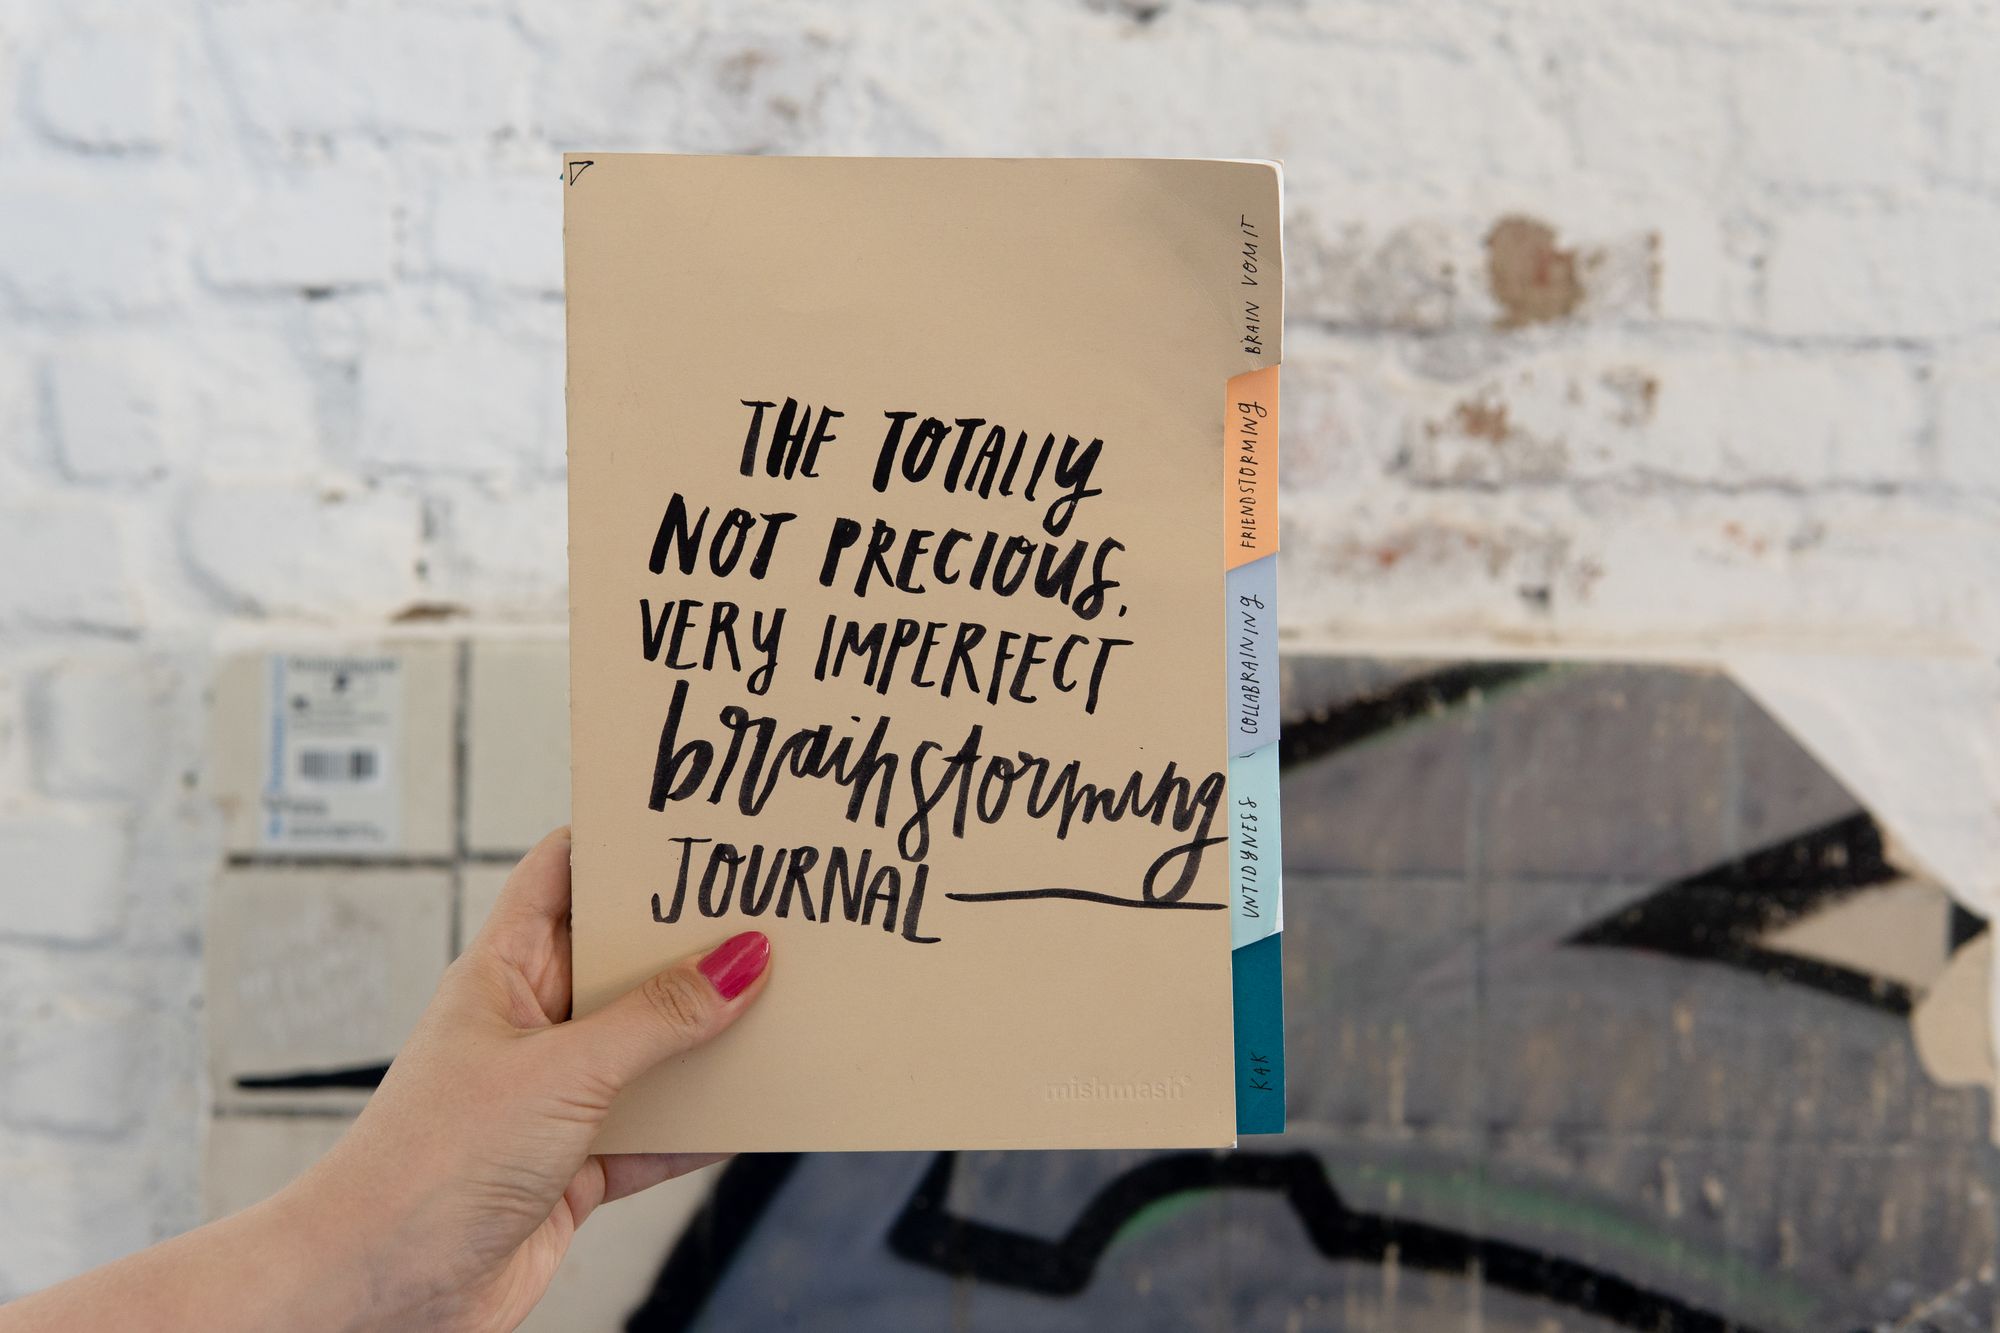 The Totally Not Precious, Very Imperfect, Brainstorming Journal